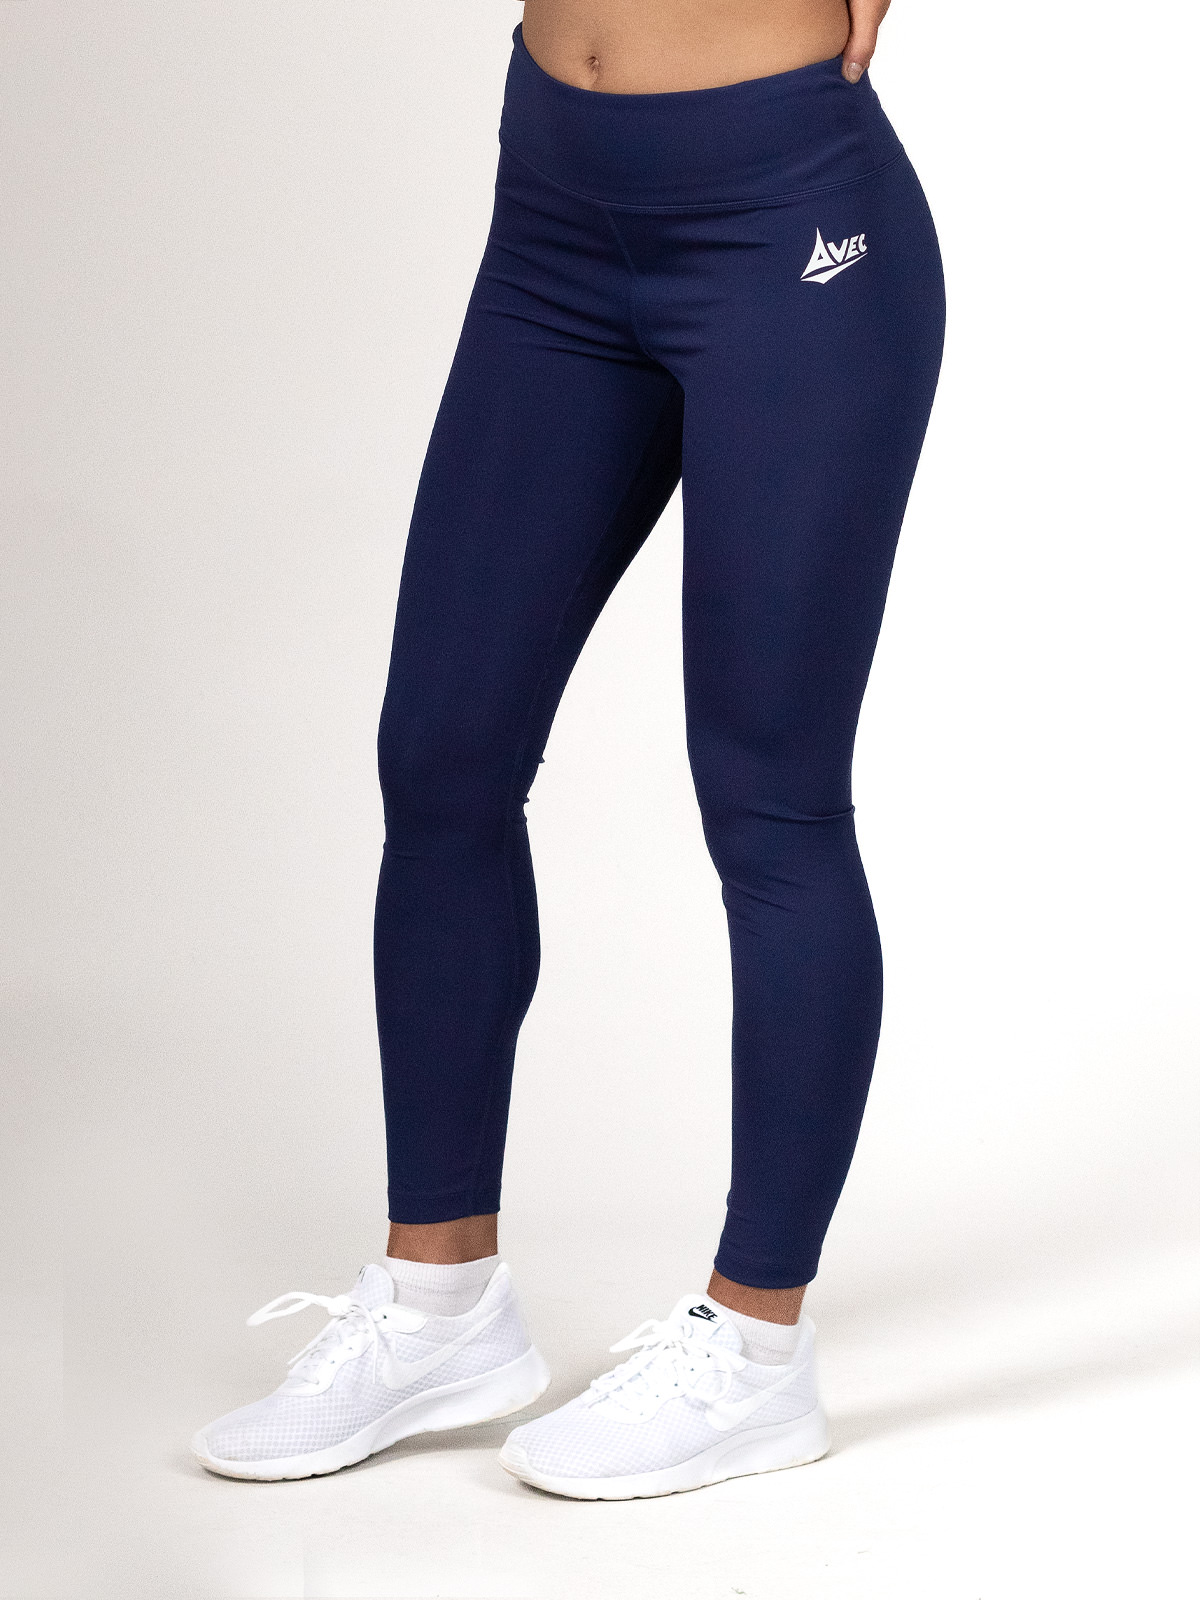 picture of womens tech leggings - navy